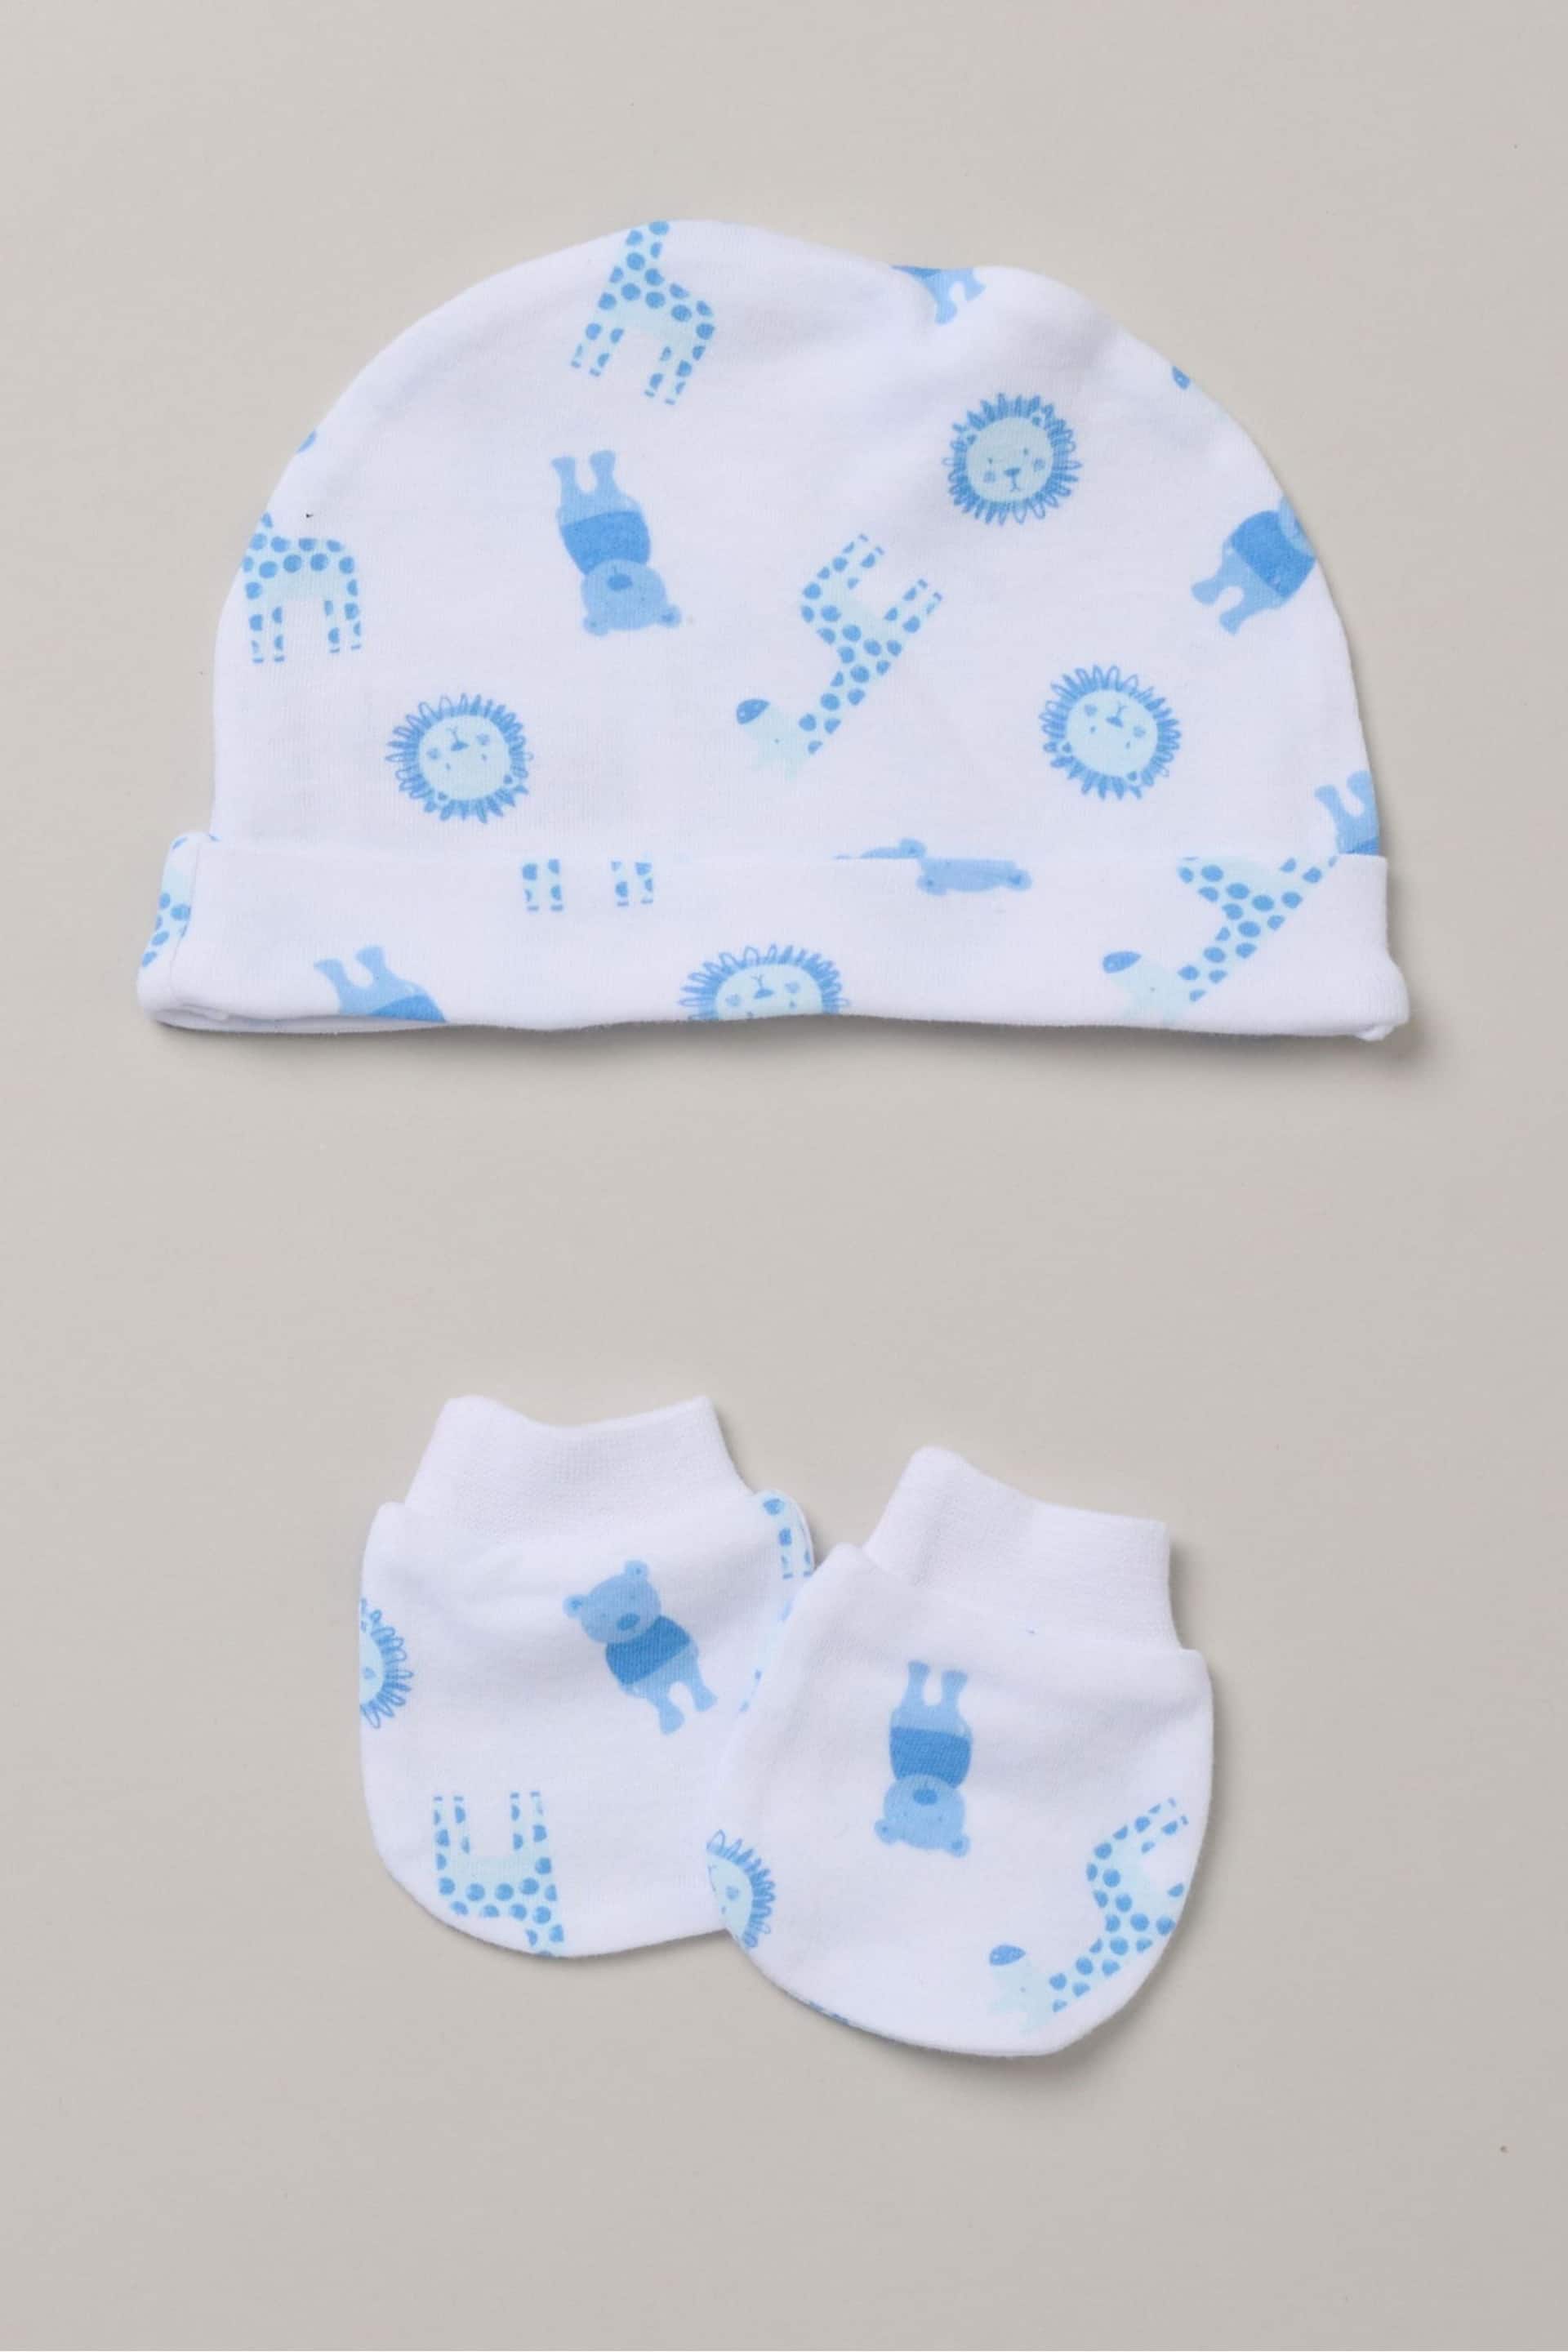 Rock-A-Bye Baby Boutique Blue Animal Print Cotton 6-Piece Baby Gift Set - Image 2 of 5